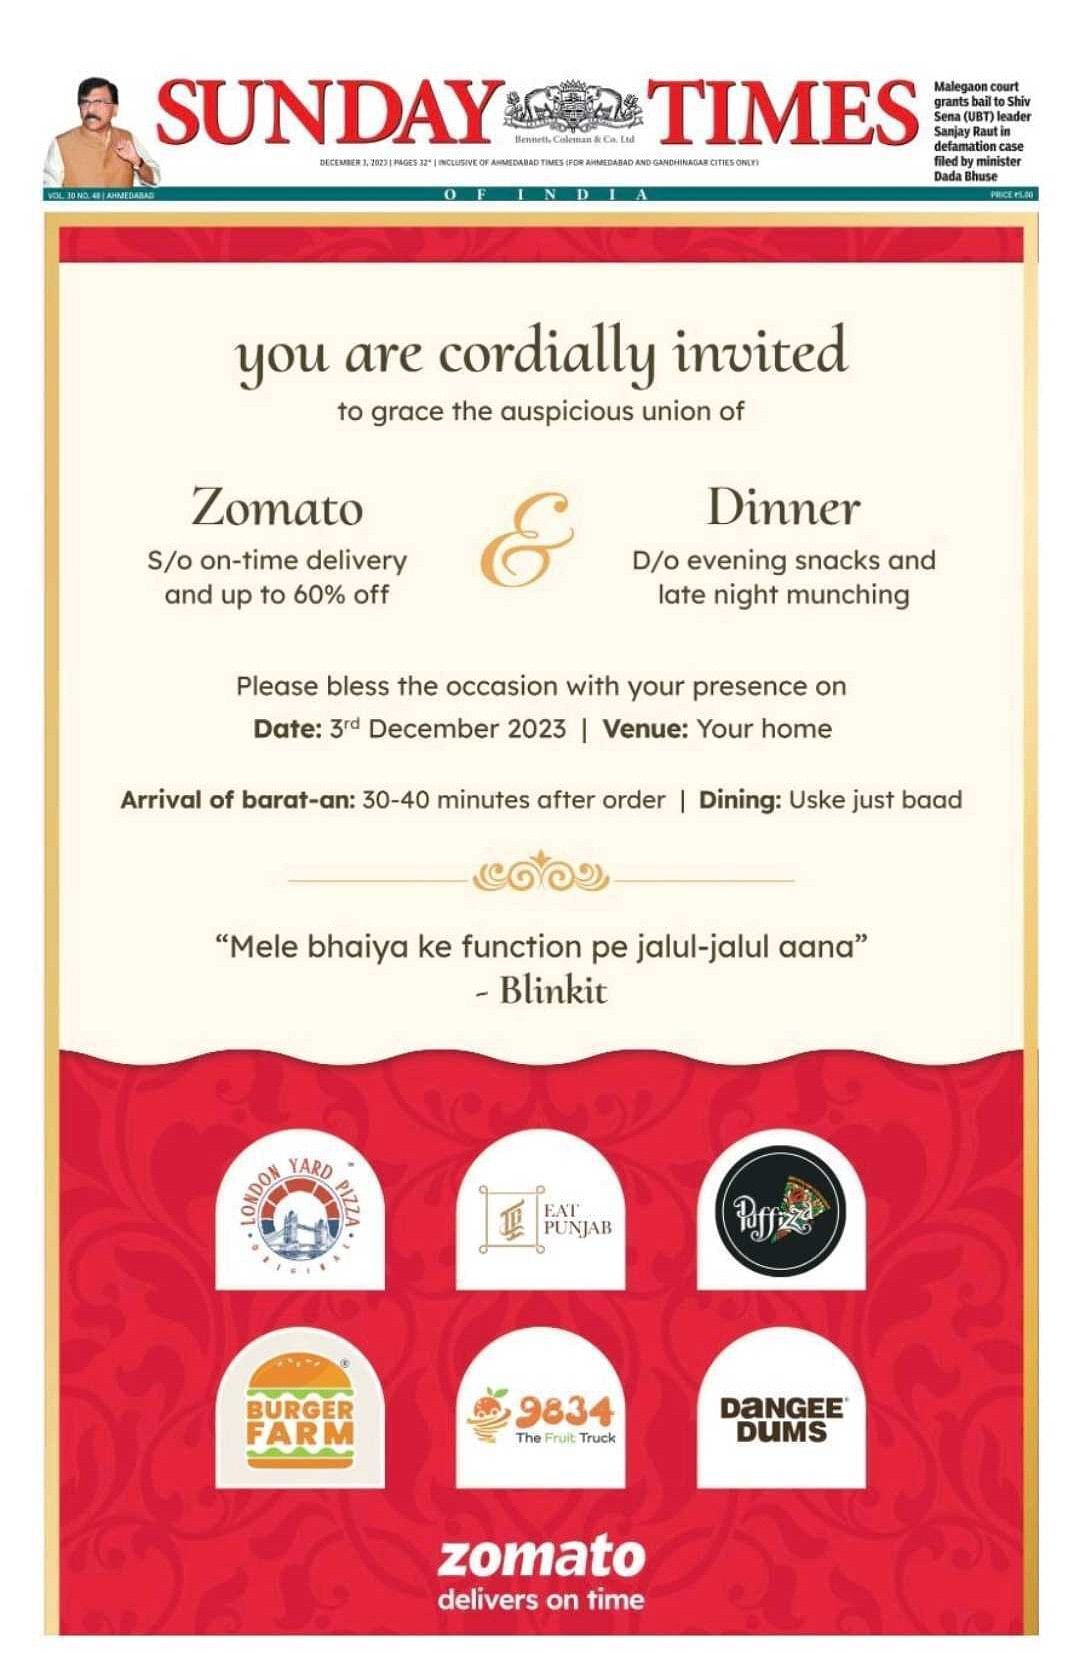 Is Zomato inviting you to its wedding?